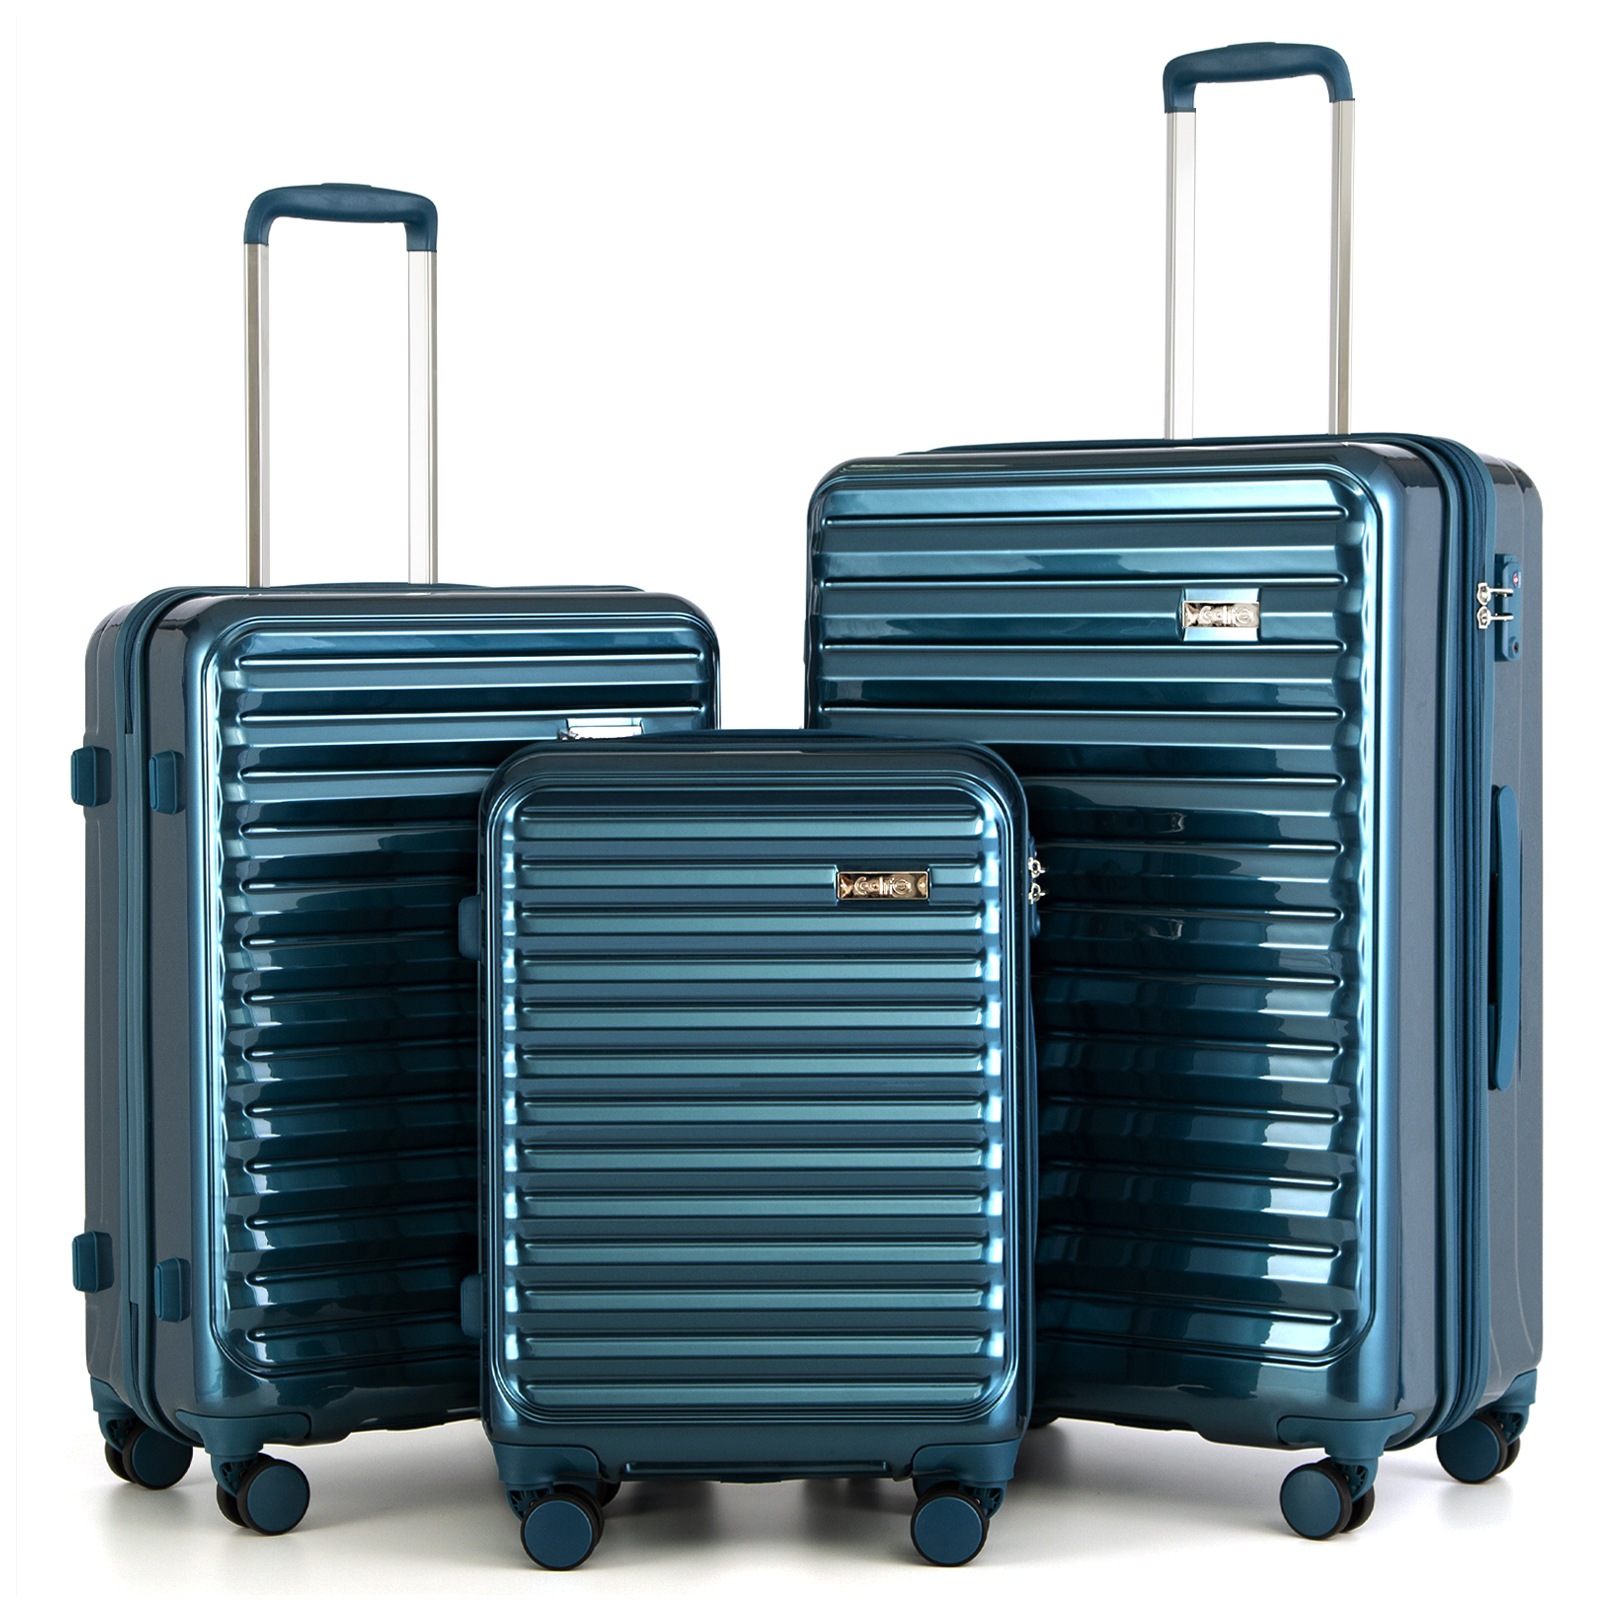 only 28 Coolife Luggage Expandable _carry on green new, S 20in Suitcase PC+ABS Spinner 20in 24in 28in Carry on 